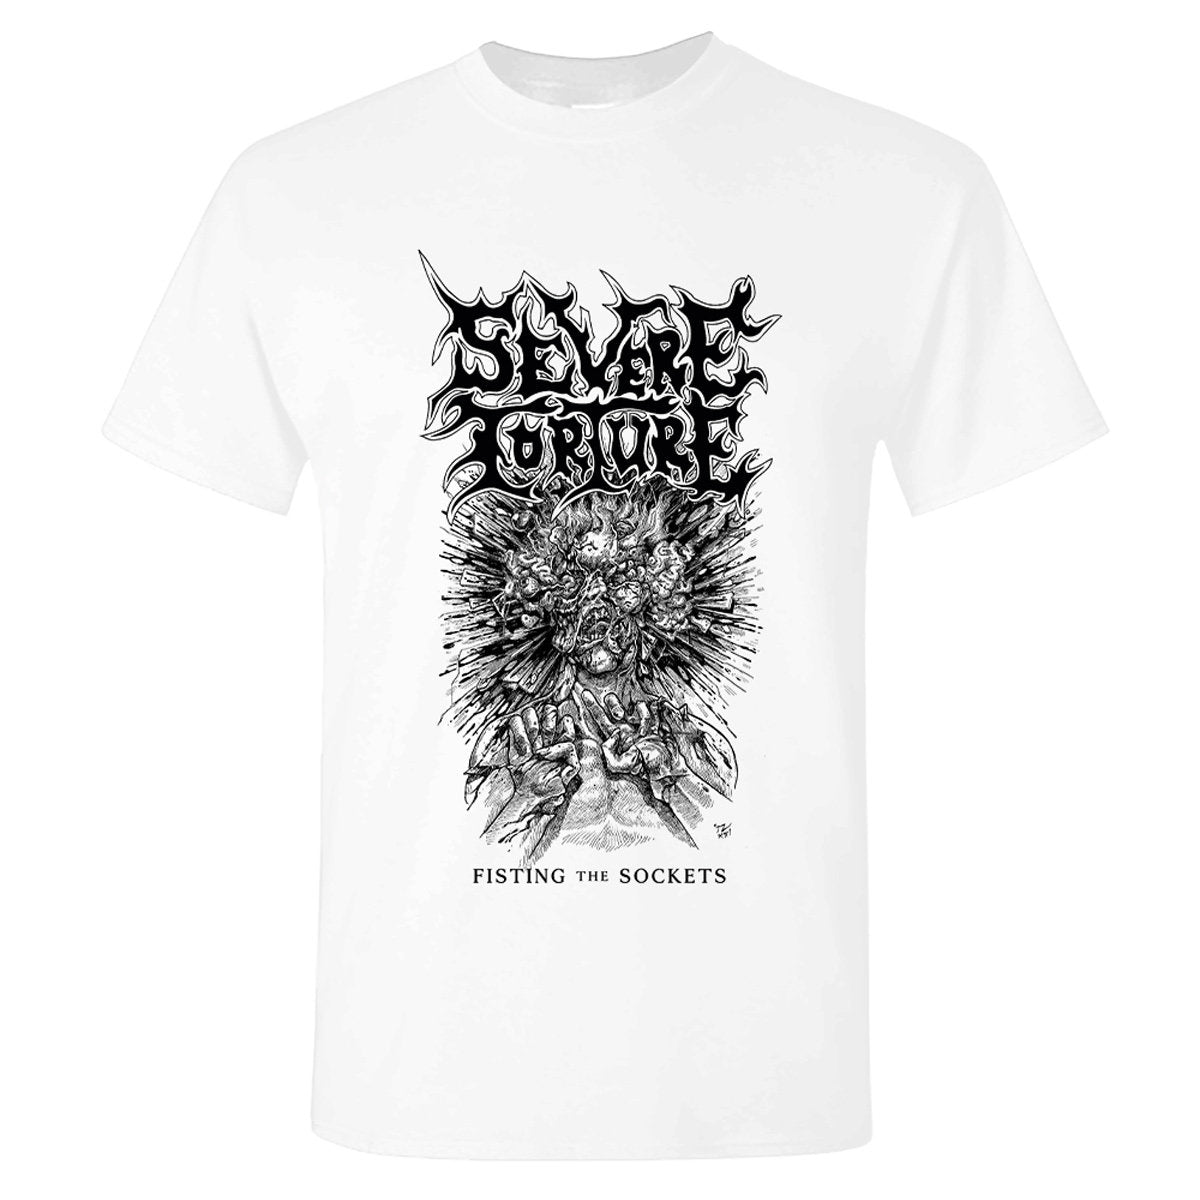 Severe Torture "Fisting The Sockets" T shirt